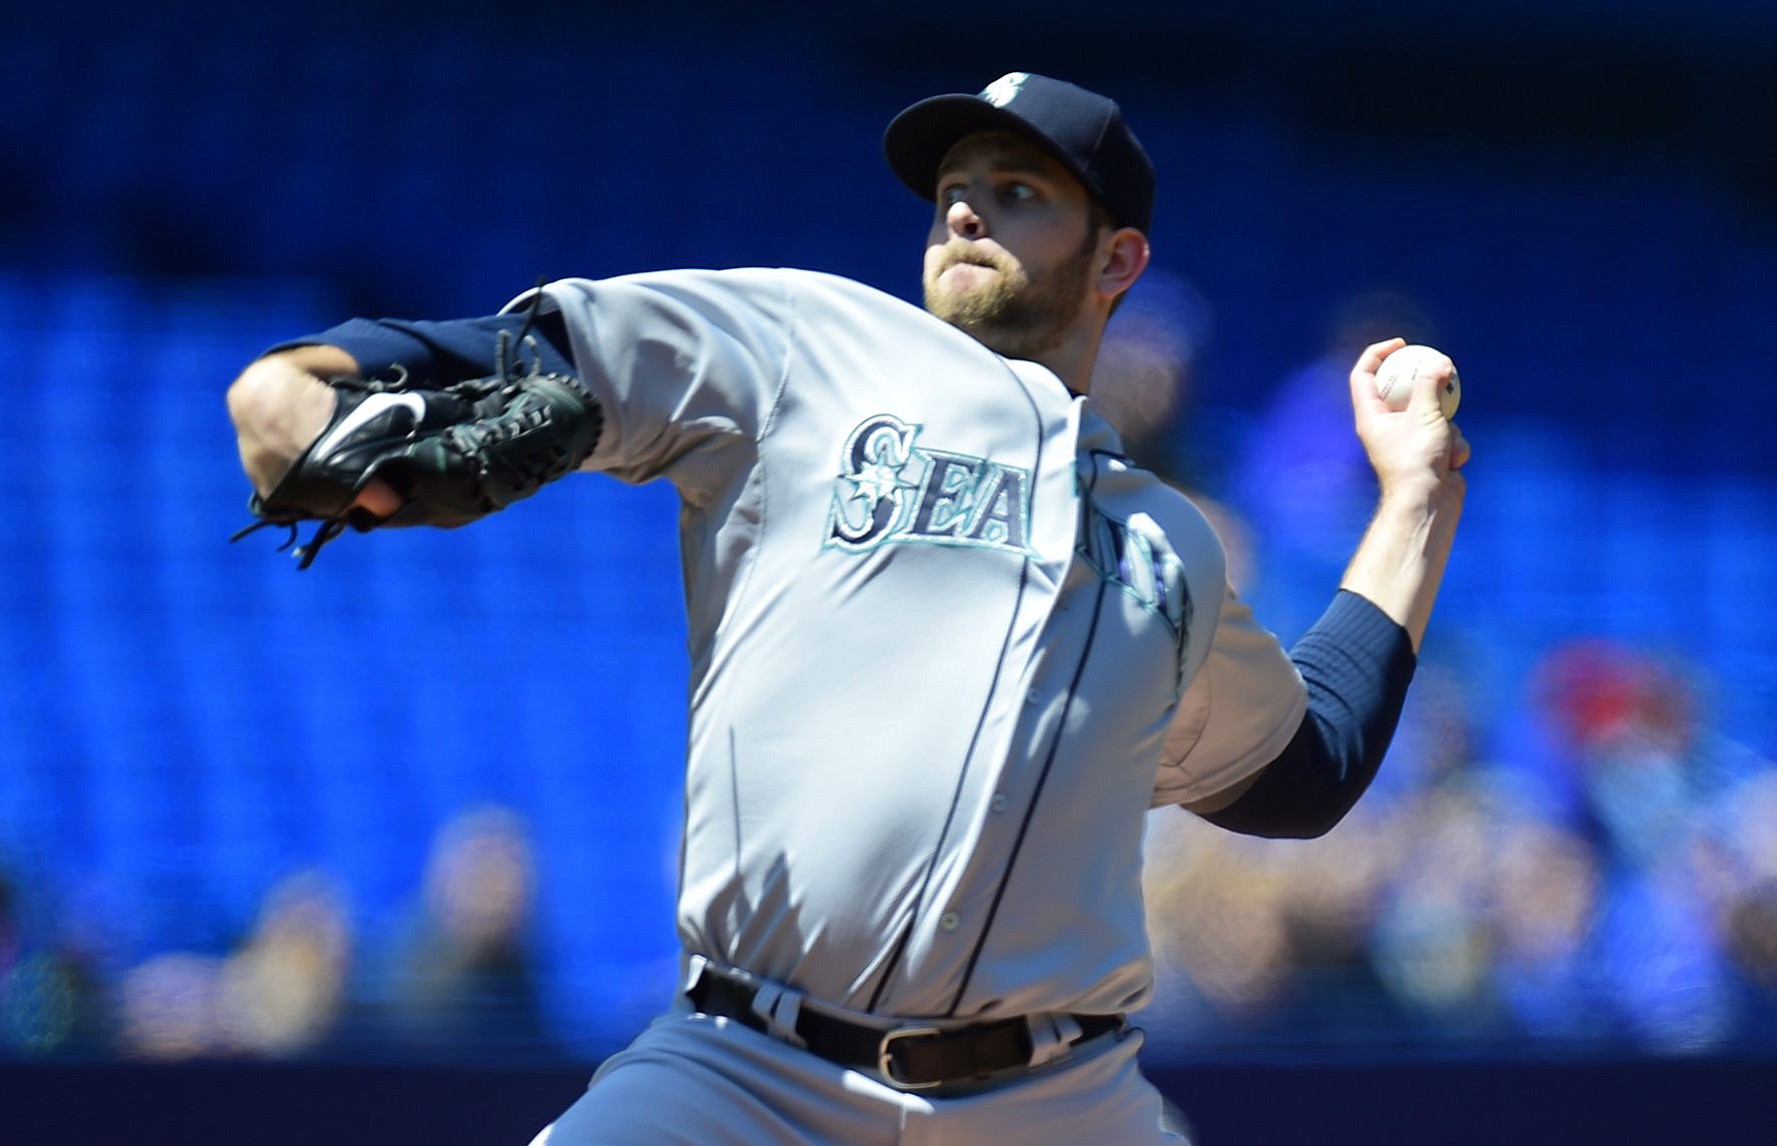 Seattle Mariners starting pitcher James Paxton throws during the first inning against the Toronto Blue Jays, Saturday, May 23, 2015, in Toronto.